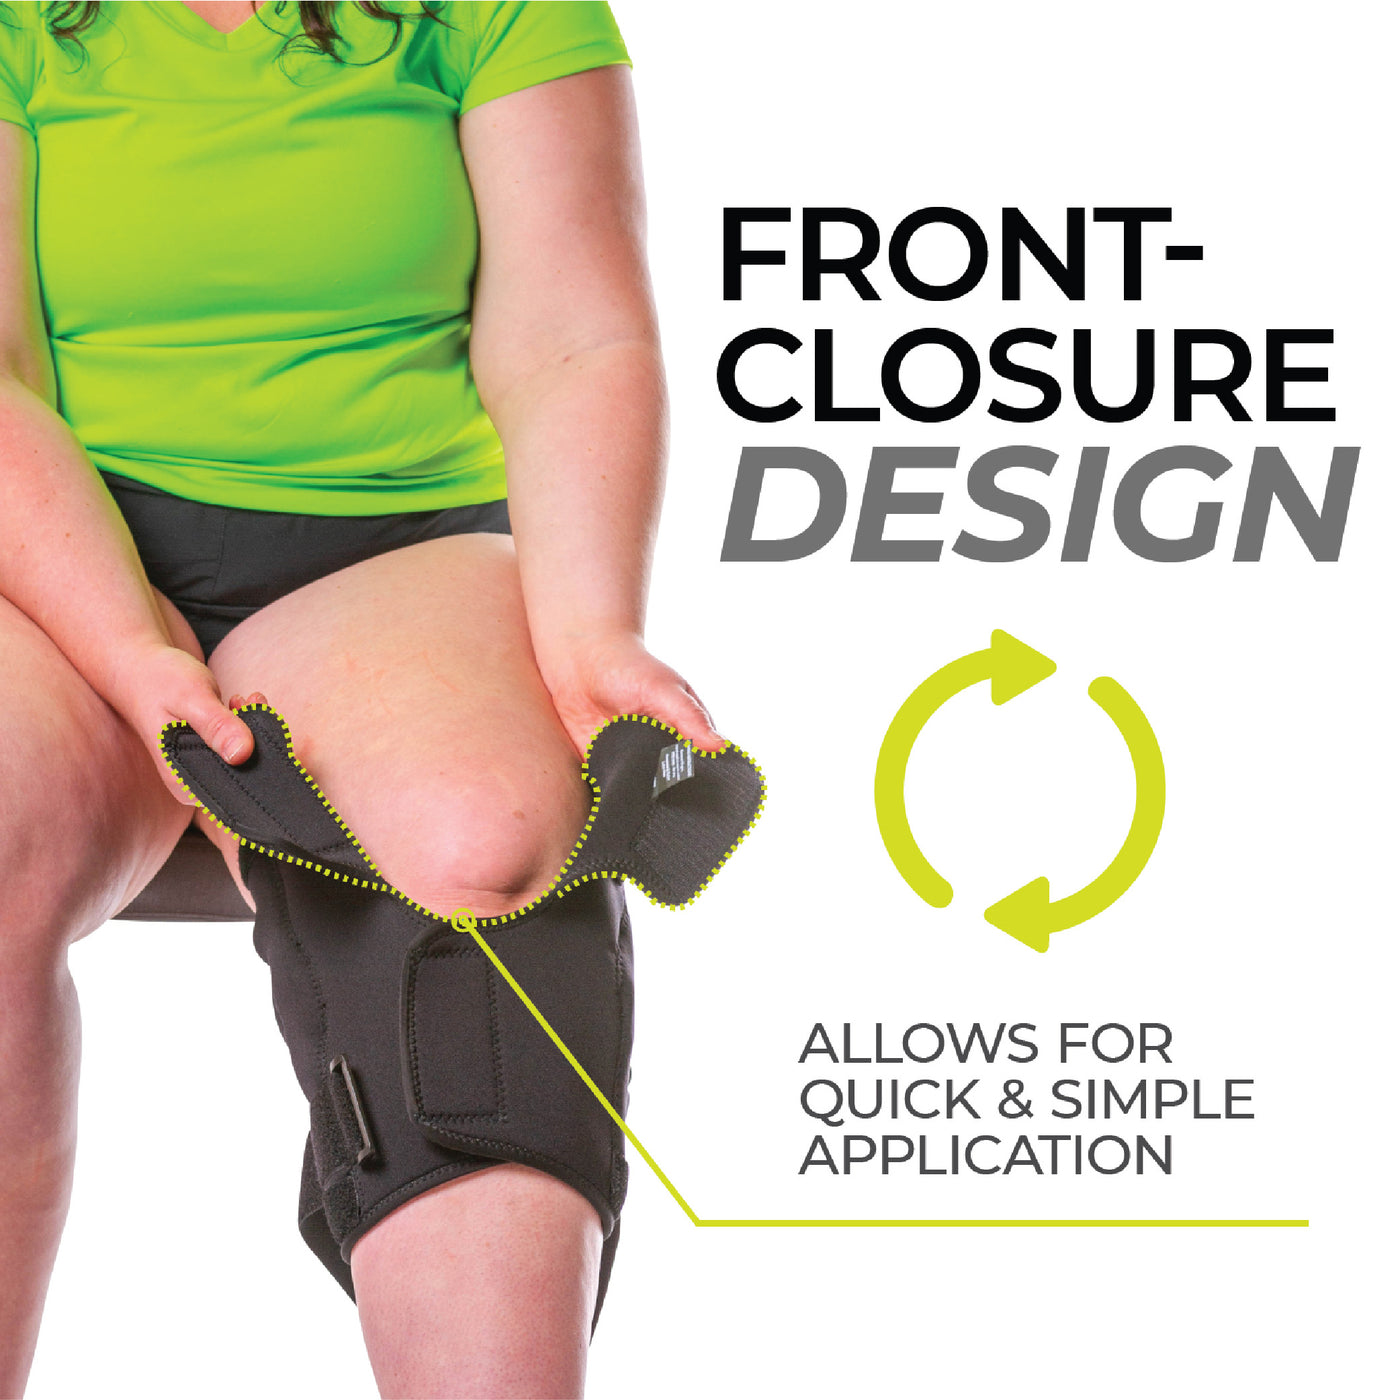 The BraceAbility wrap-around brace for a meniscus tear has a front-closure design that makes it quick and easy to put on